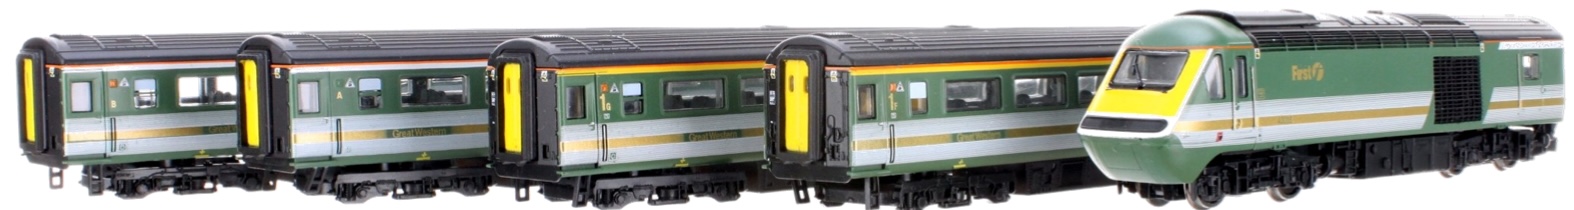 N Scale - Dapol - 2D-019-011 - Locomotive, Diesel, BR Class 43 (HST) - Great Western (TOC) - 43005 & 43009 + 2 coaches